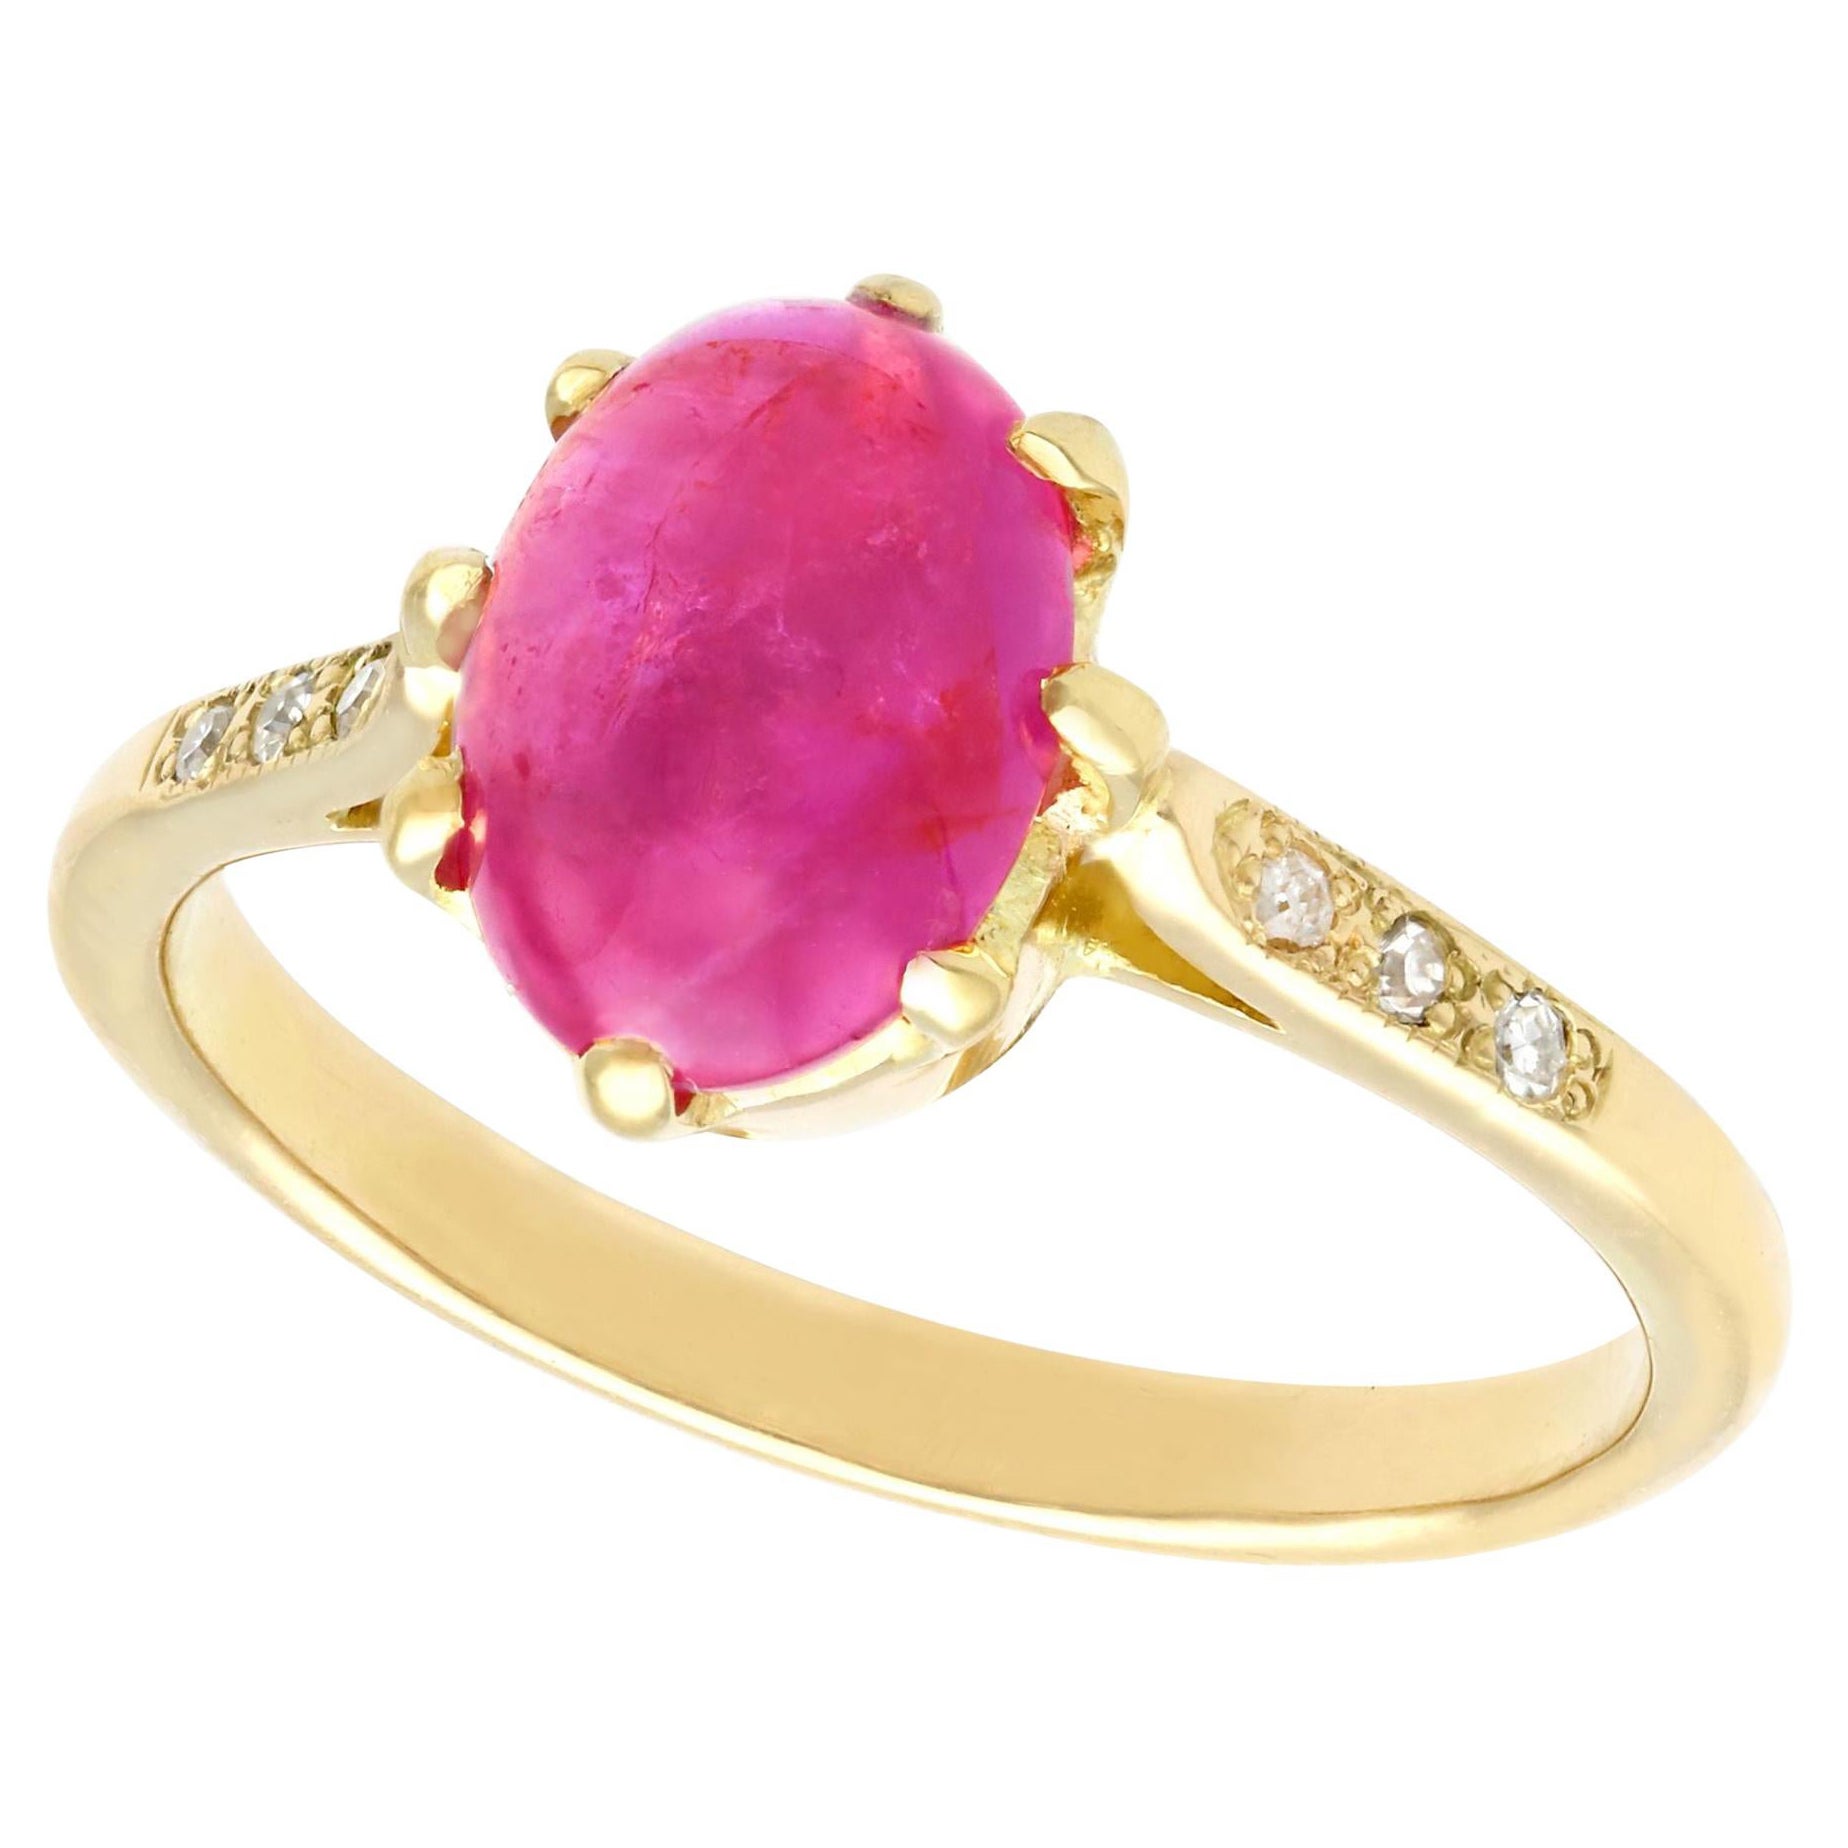 Vintage 1950s 2.68 Carat Cabochon Cut Star Ruby Diamond Gold Engagement Ring For Sale